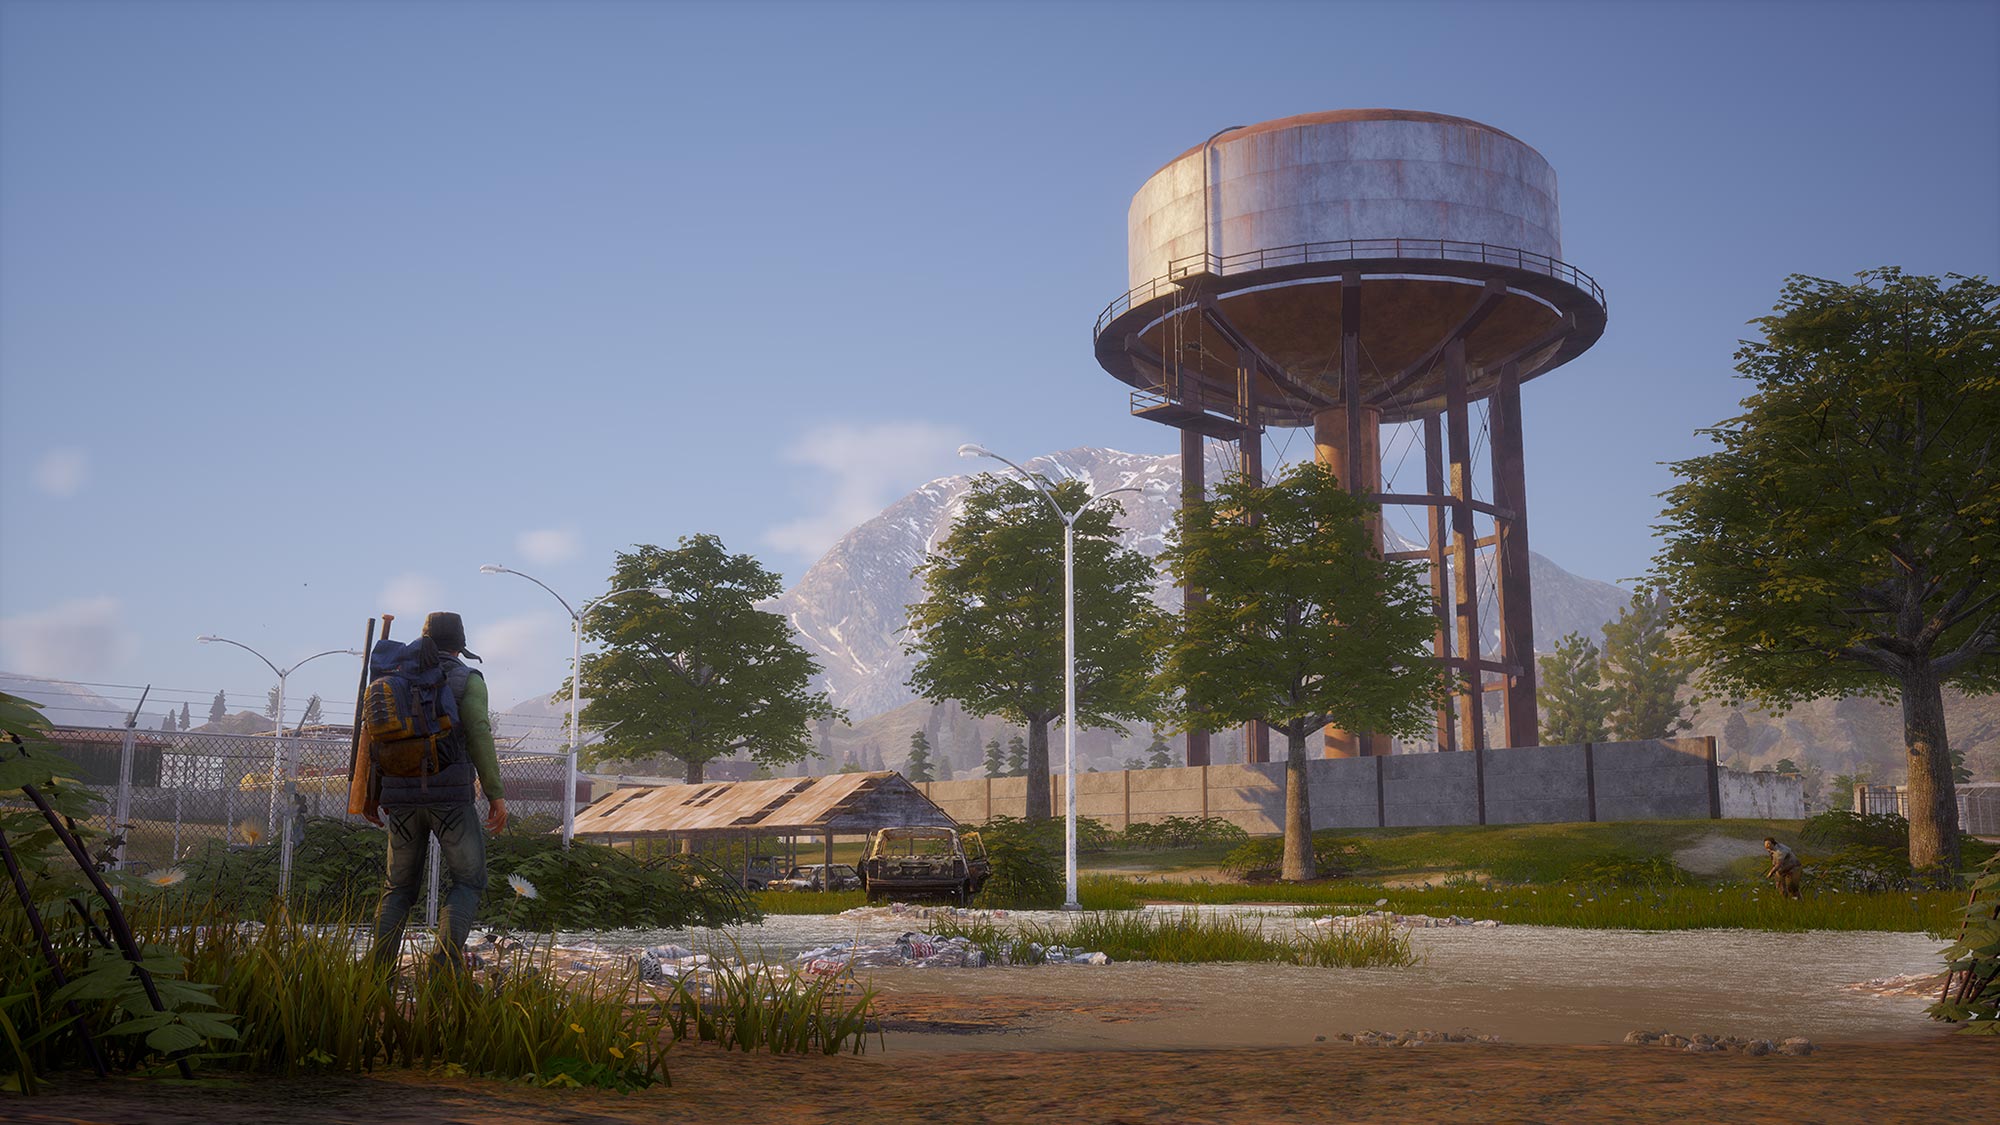 State of Decay screenshot